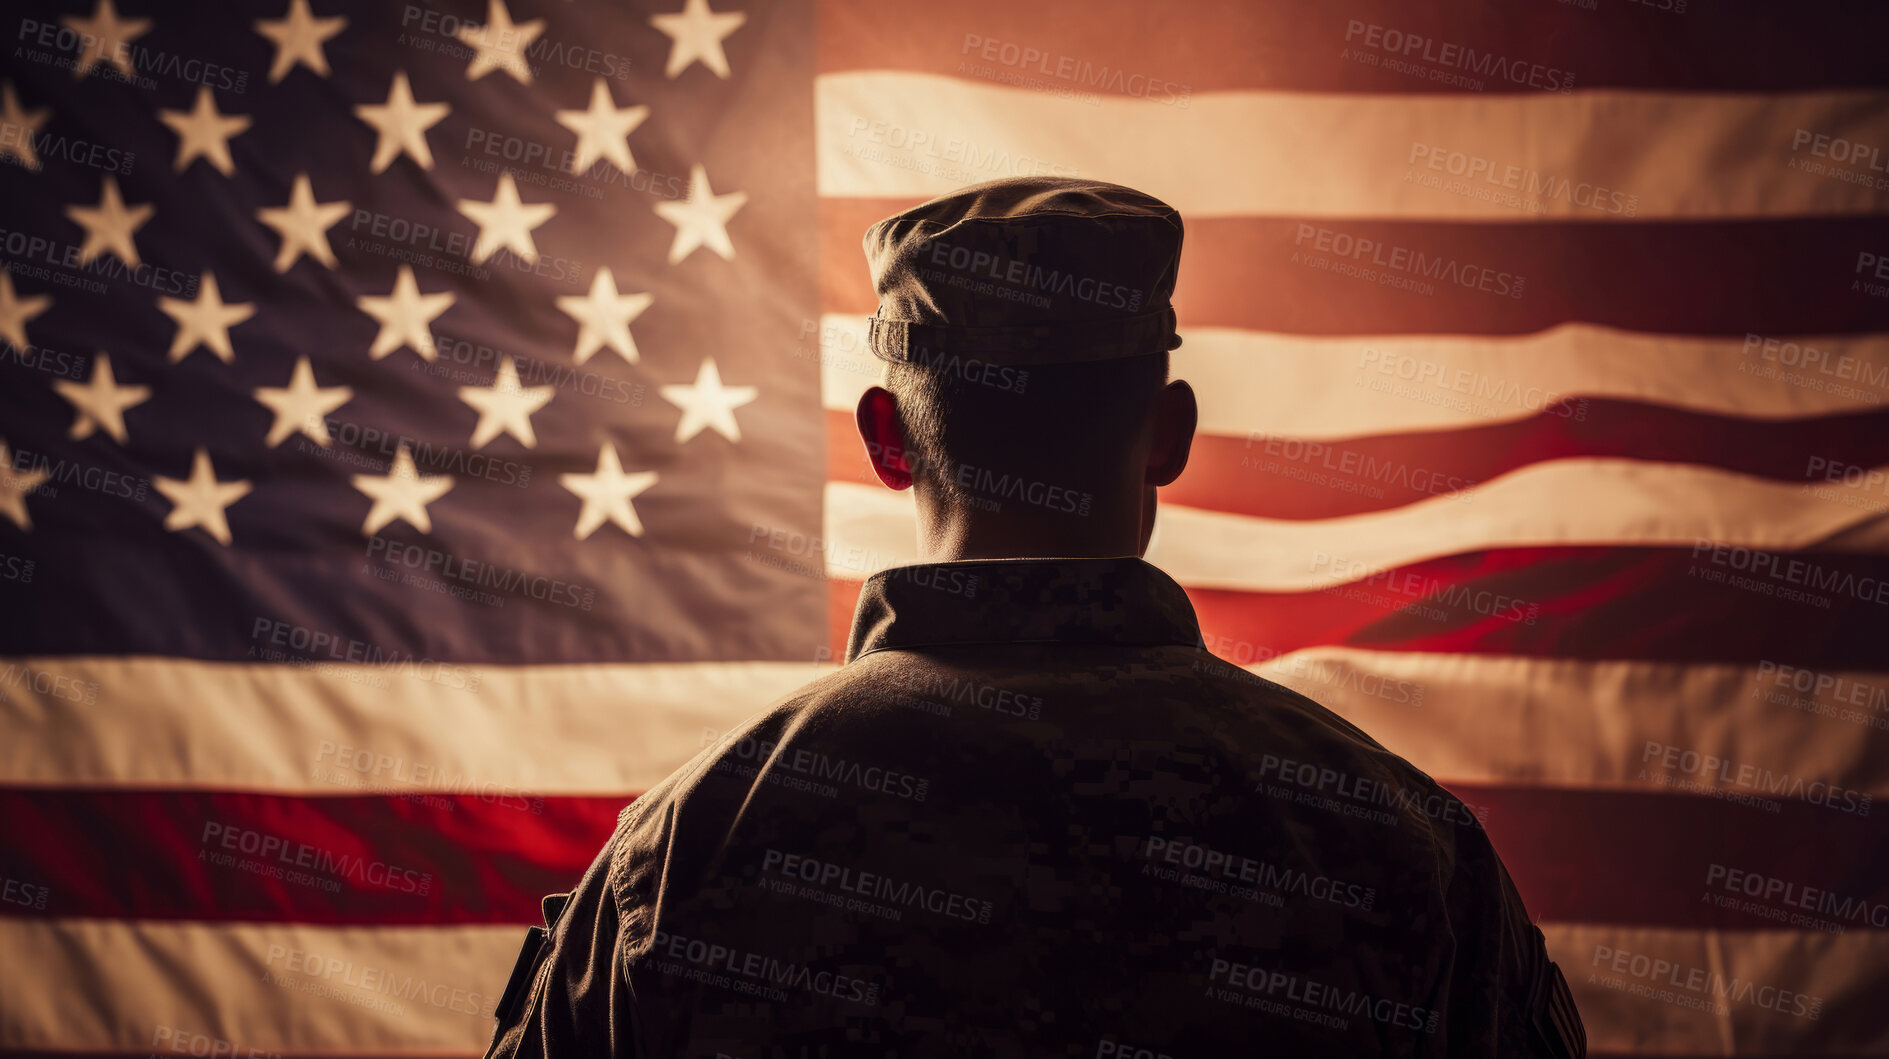 Buy stock photo Silhouette of soldier standing in front of American flag hanging on the wall. Shot from behind. Patriotic duty and pride.